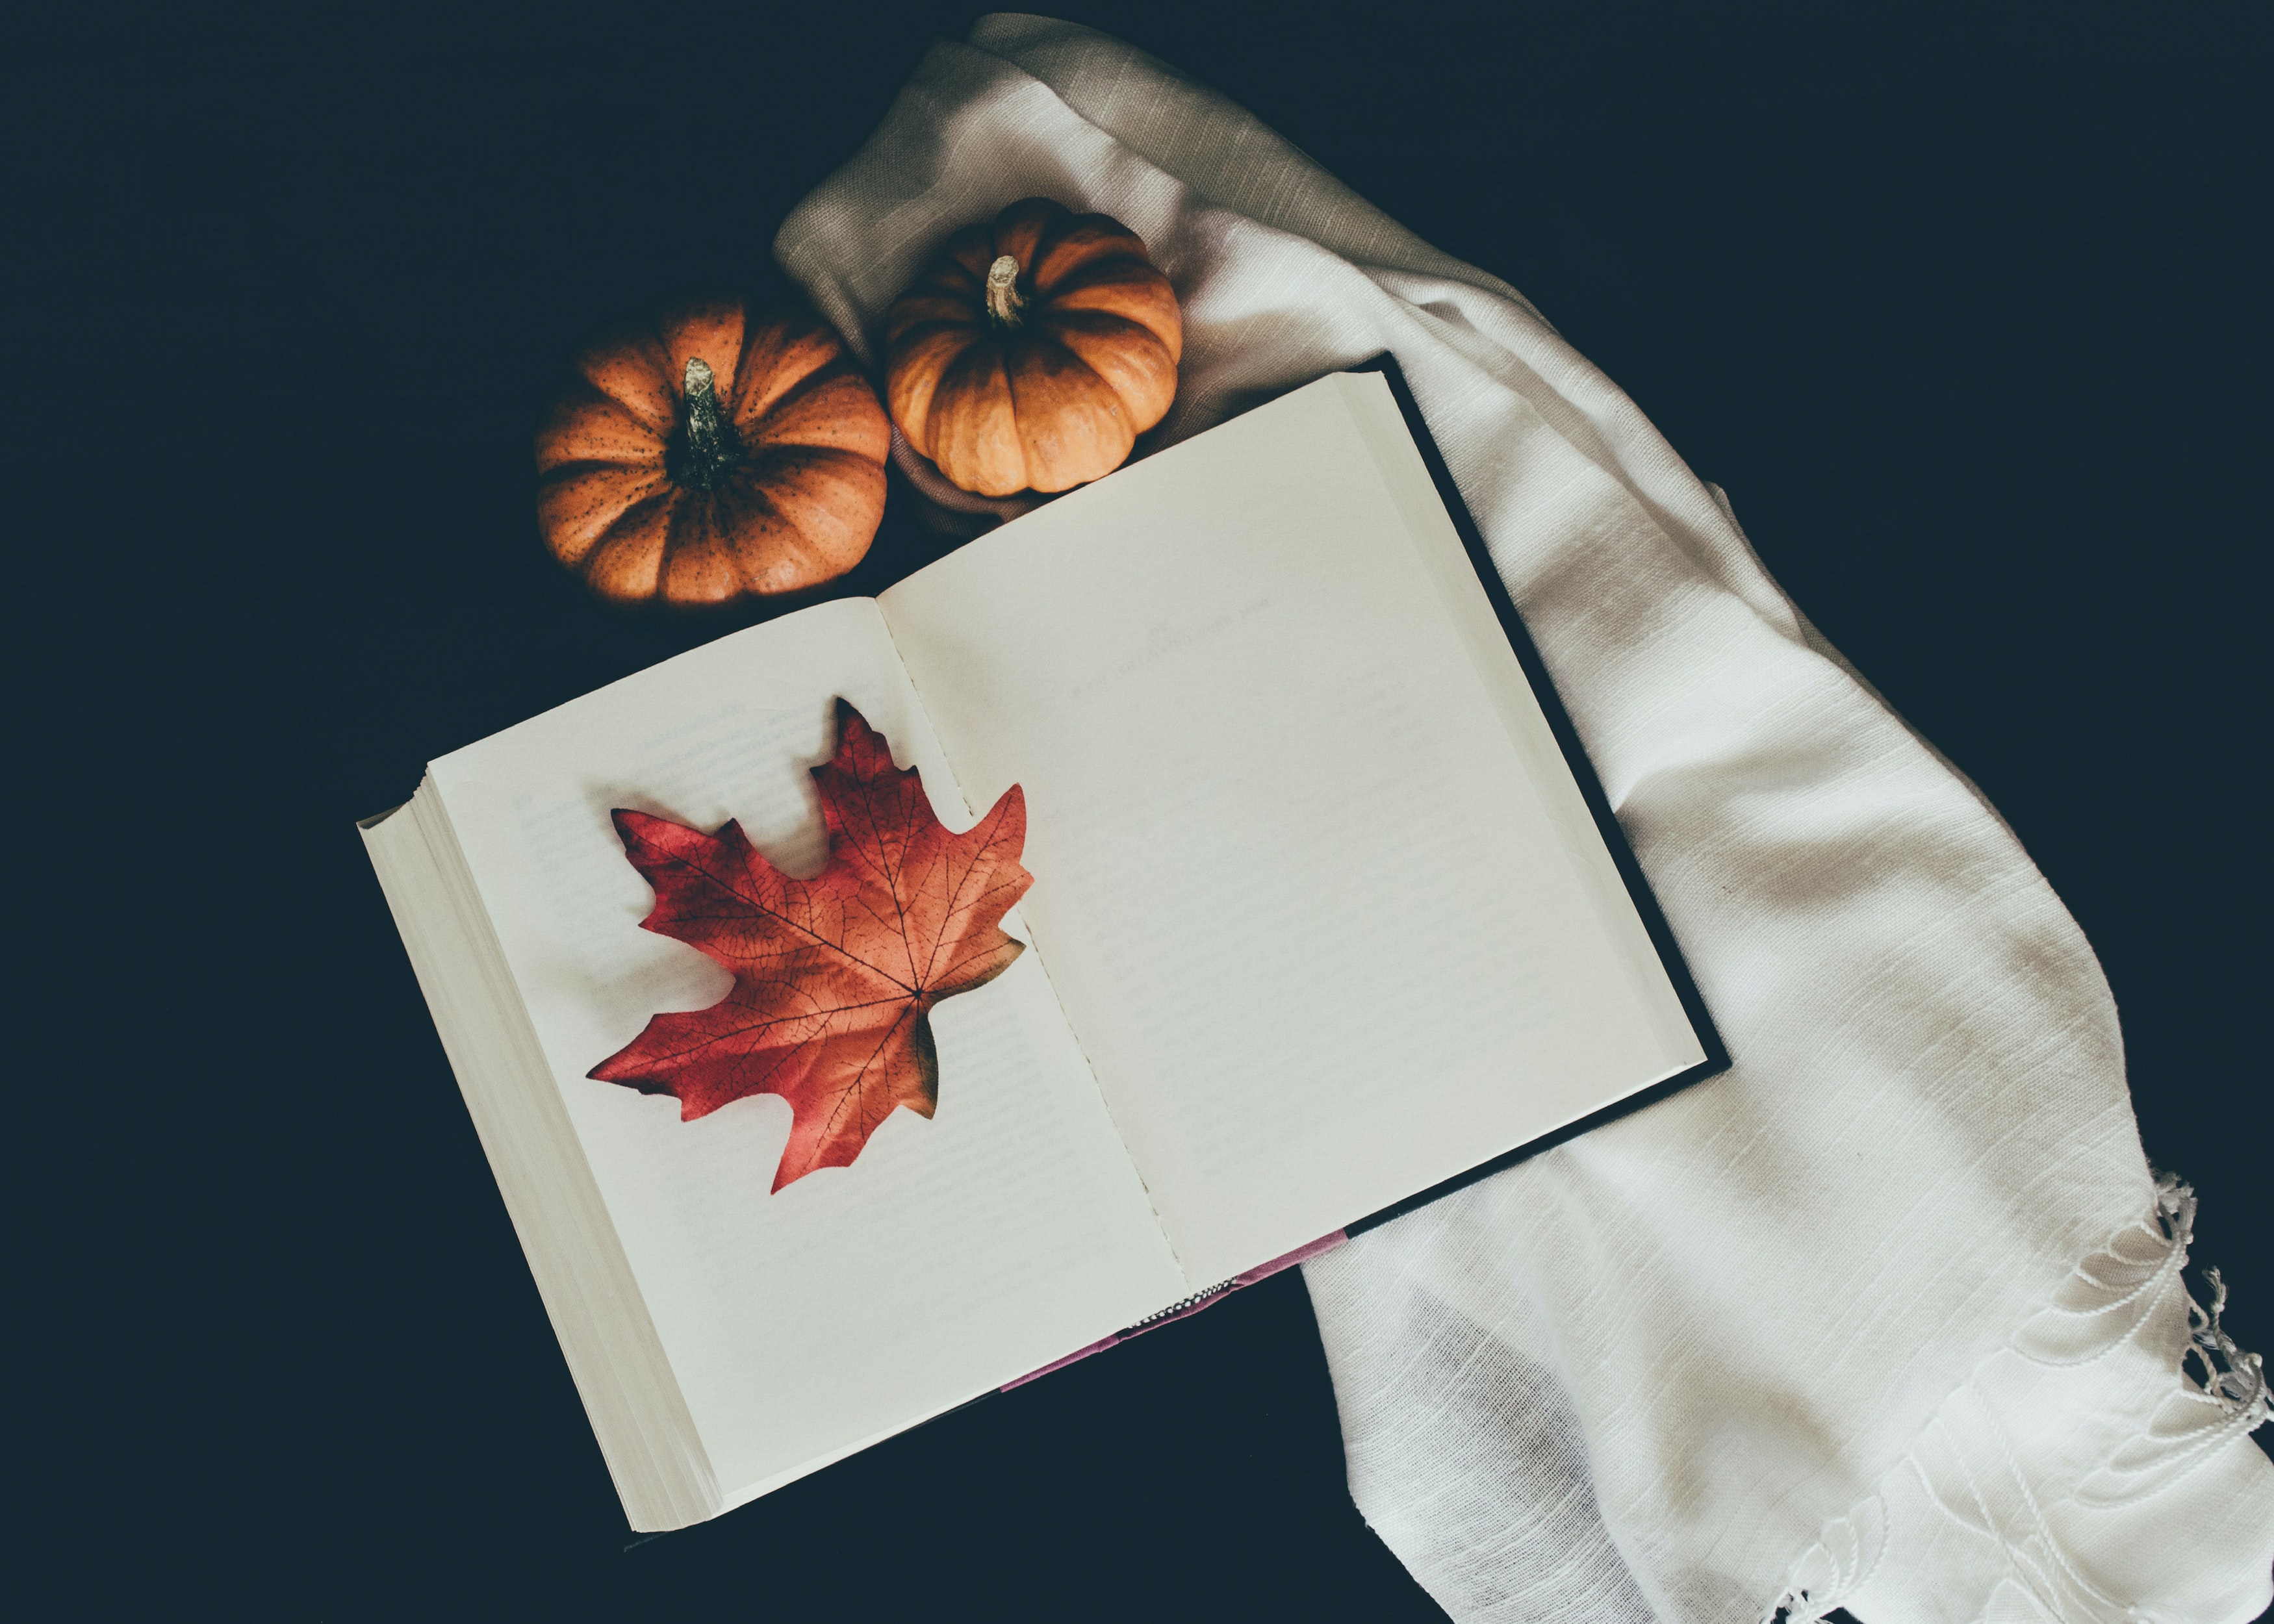 A book is open across a soft white blanket, with a maple leaf on top and two small orange pumpkins beside it.